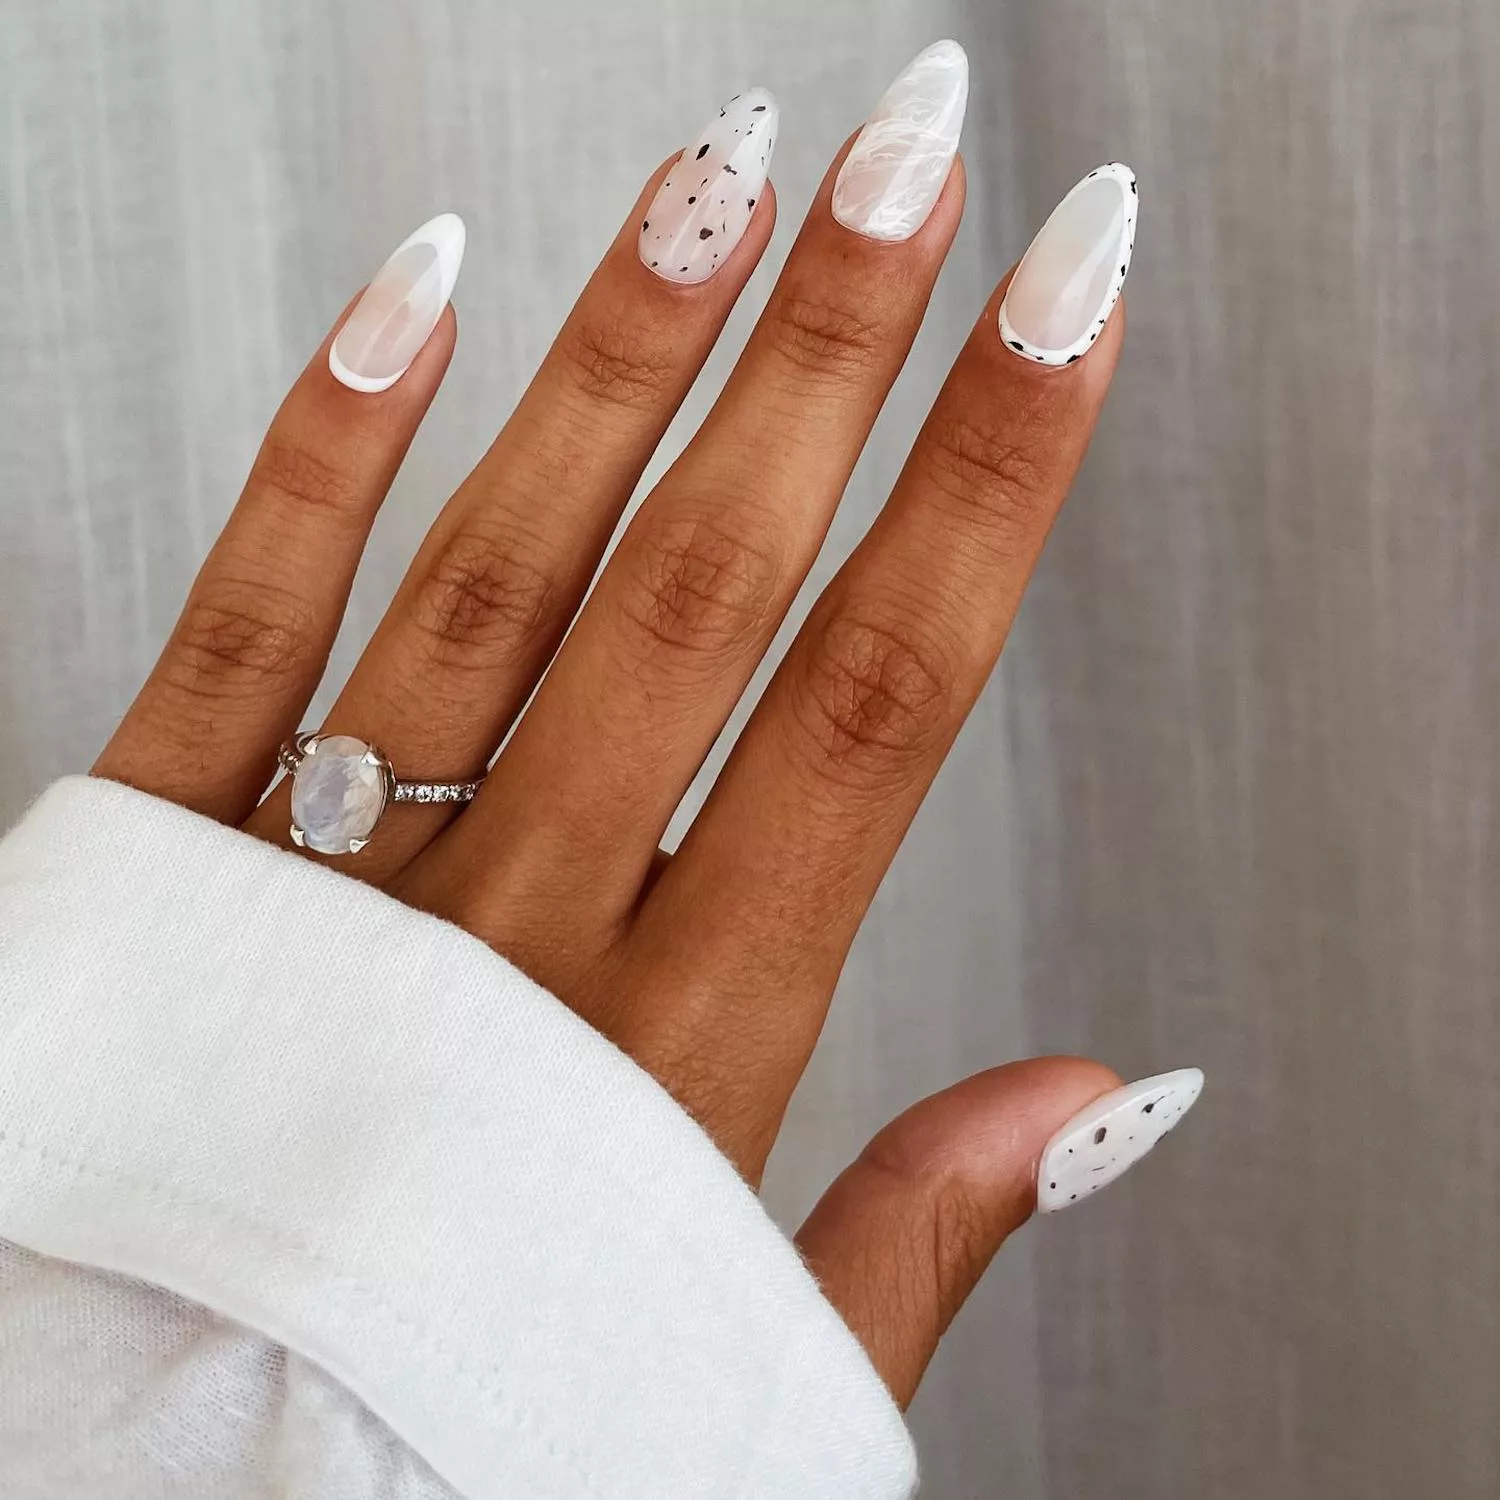 White glazed manicure with soft speckling, marbling, and solid white and speckled cuticle details